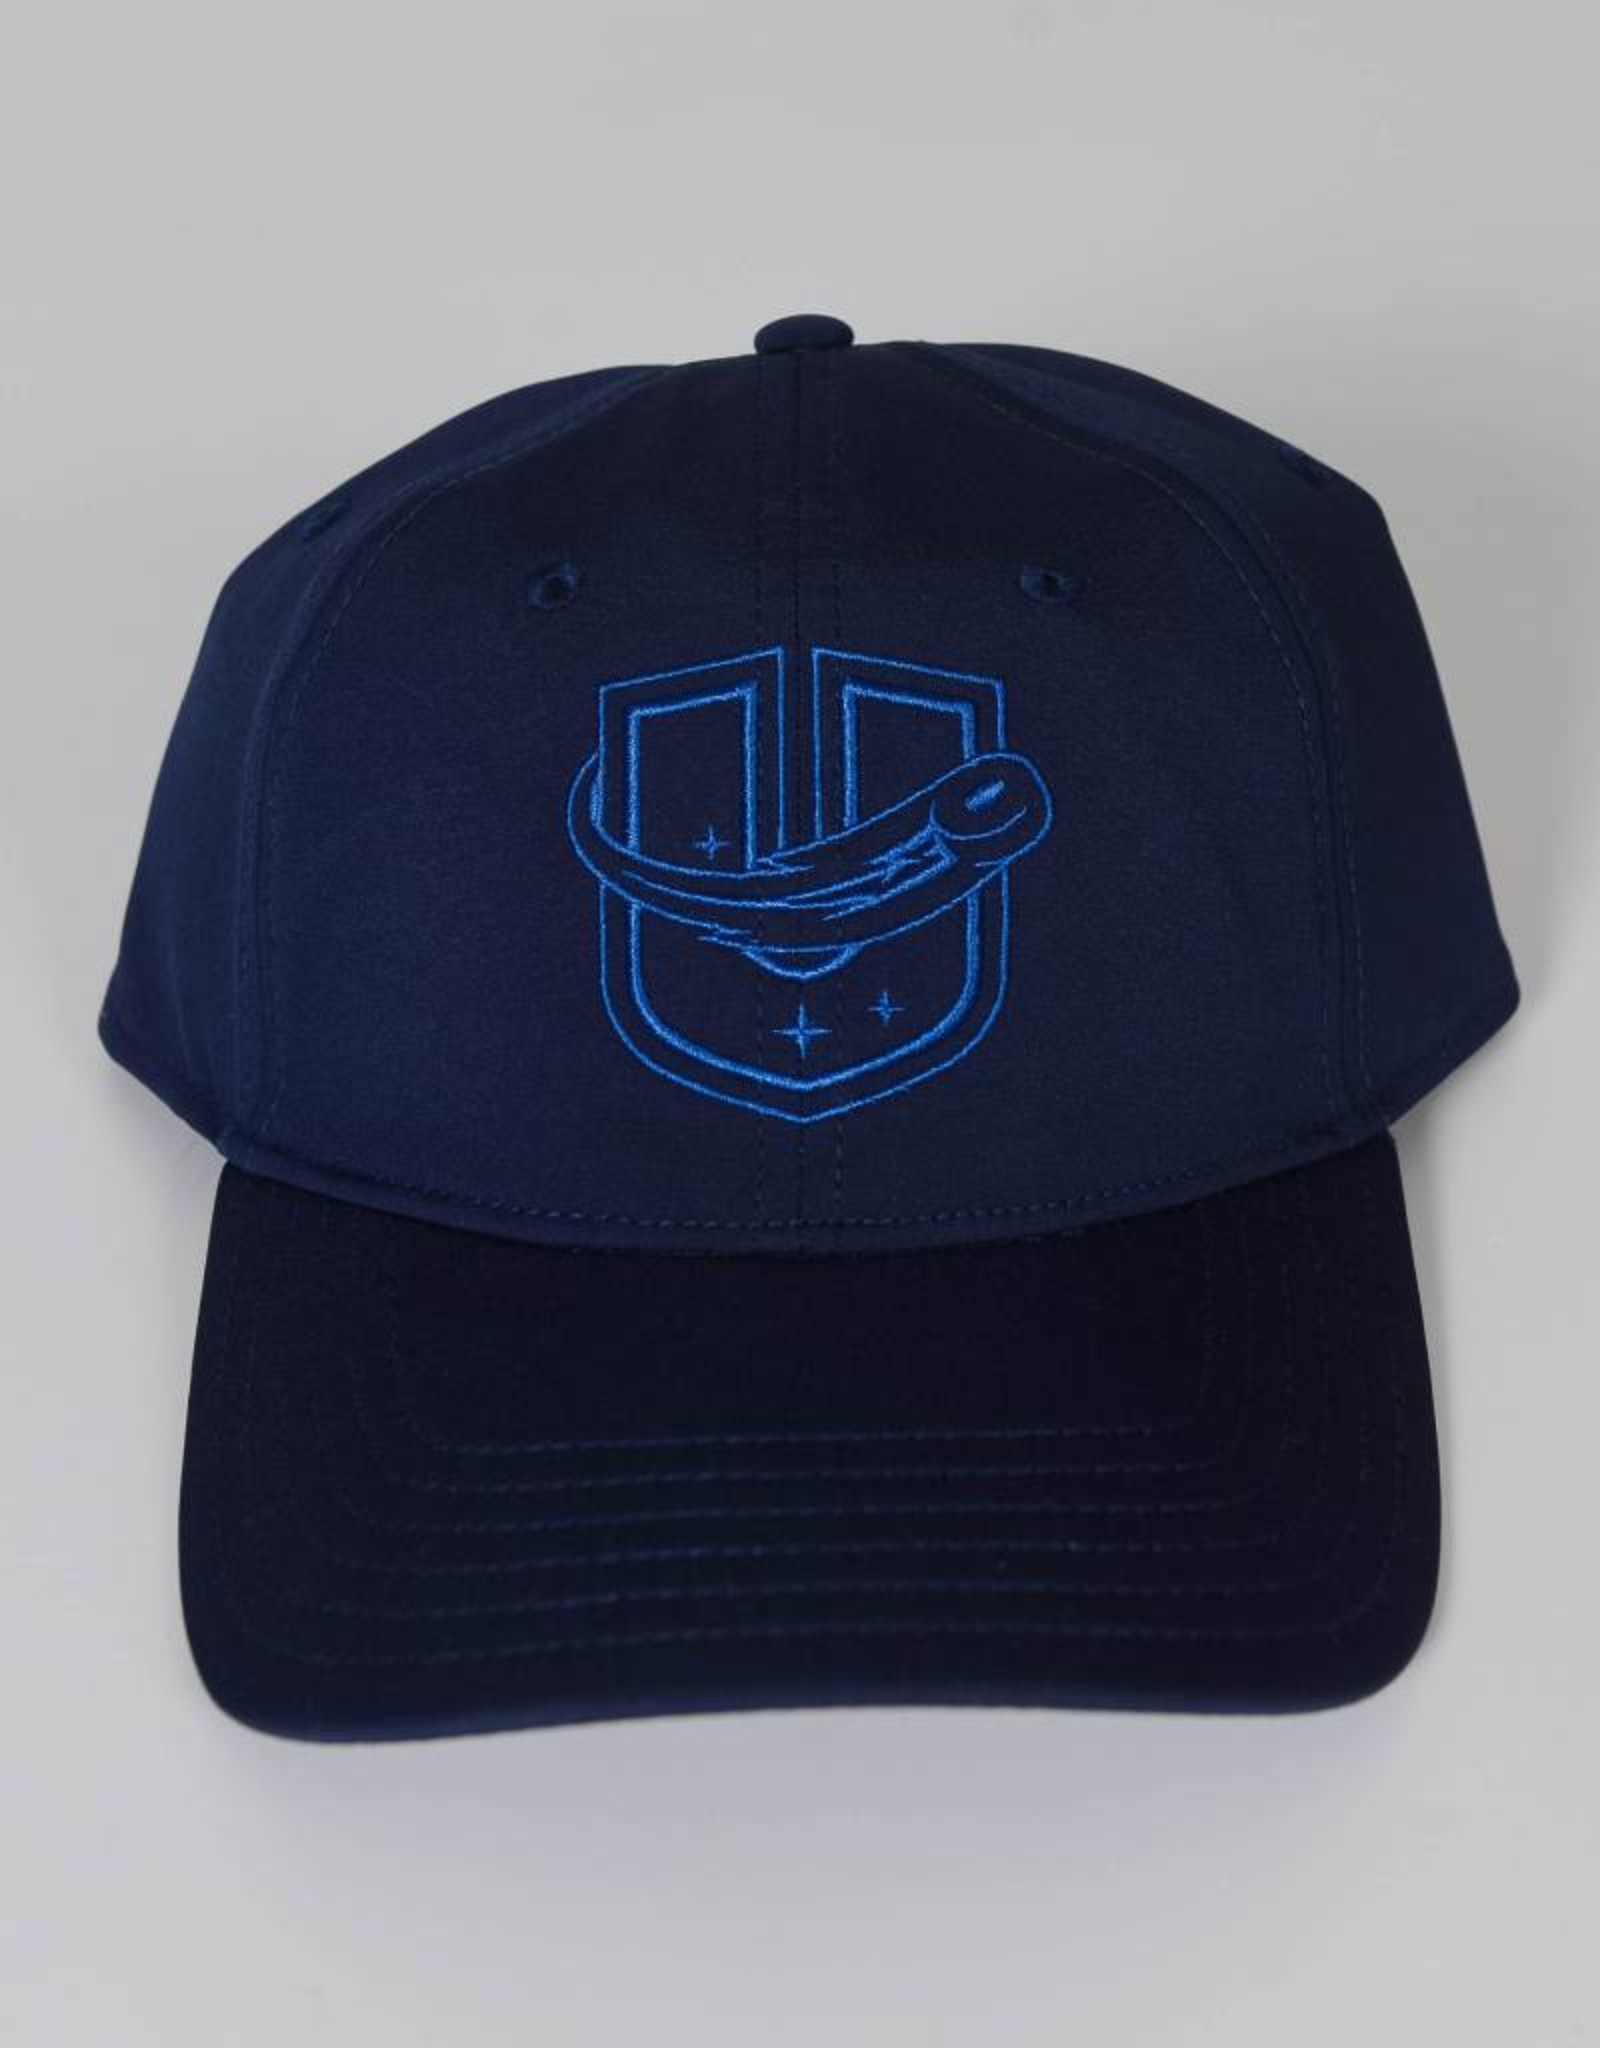 Sportiqe Navy Blue Fitted Hat w/ Neon 